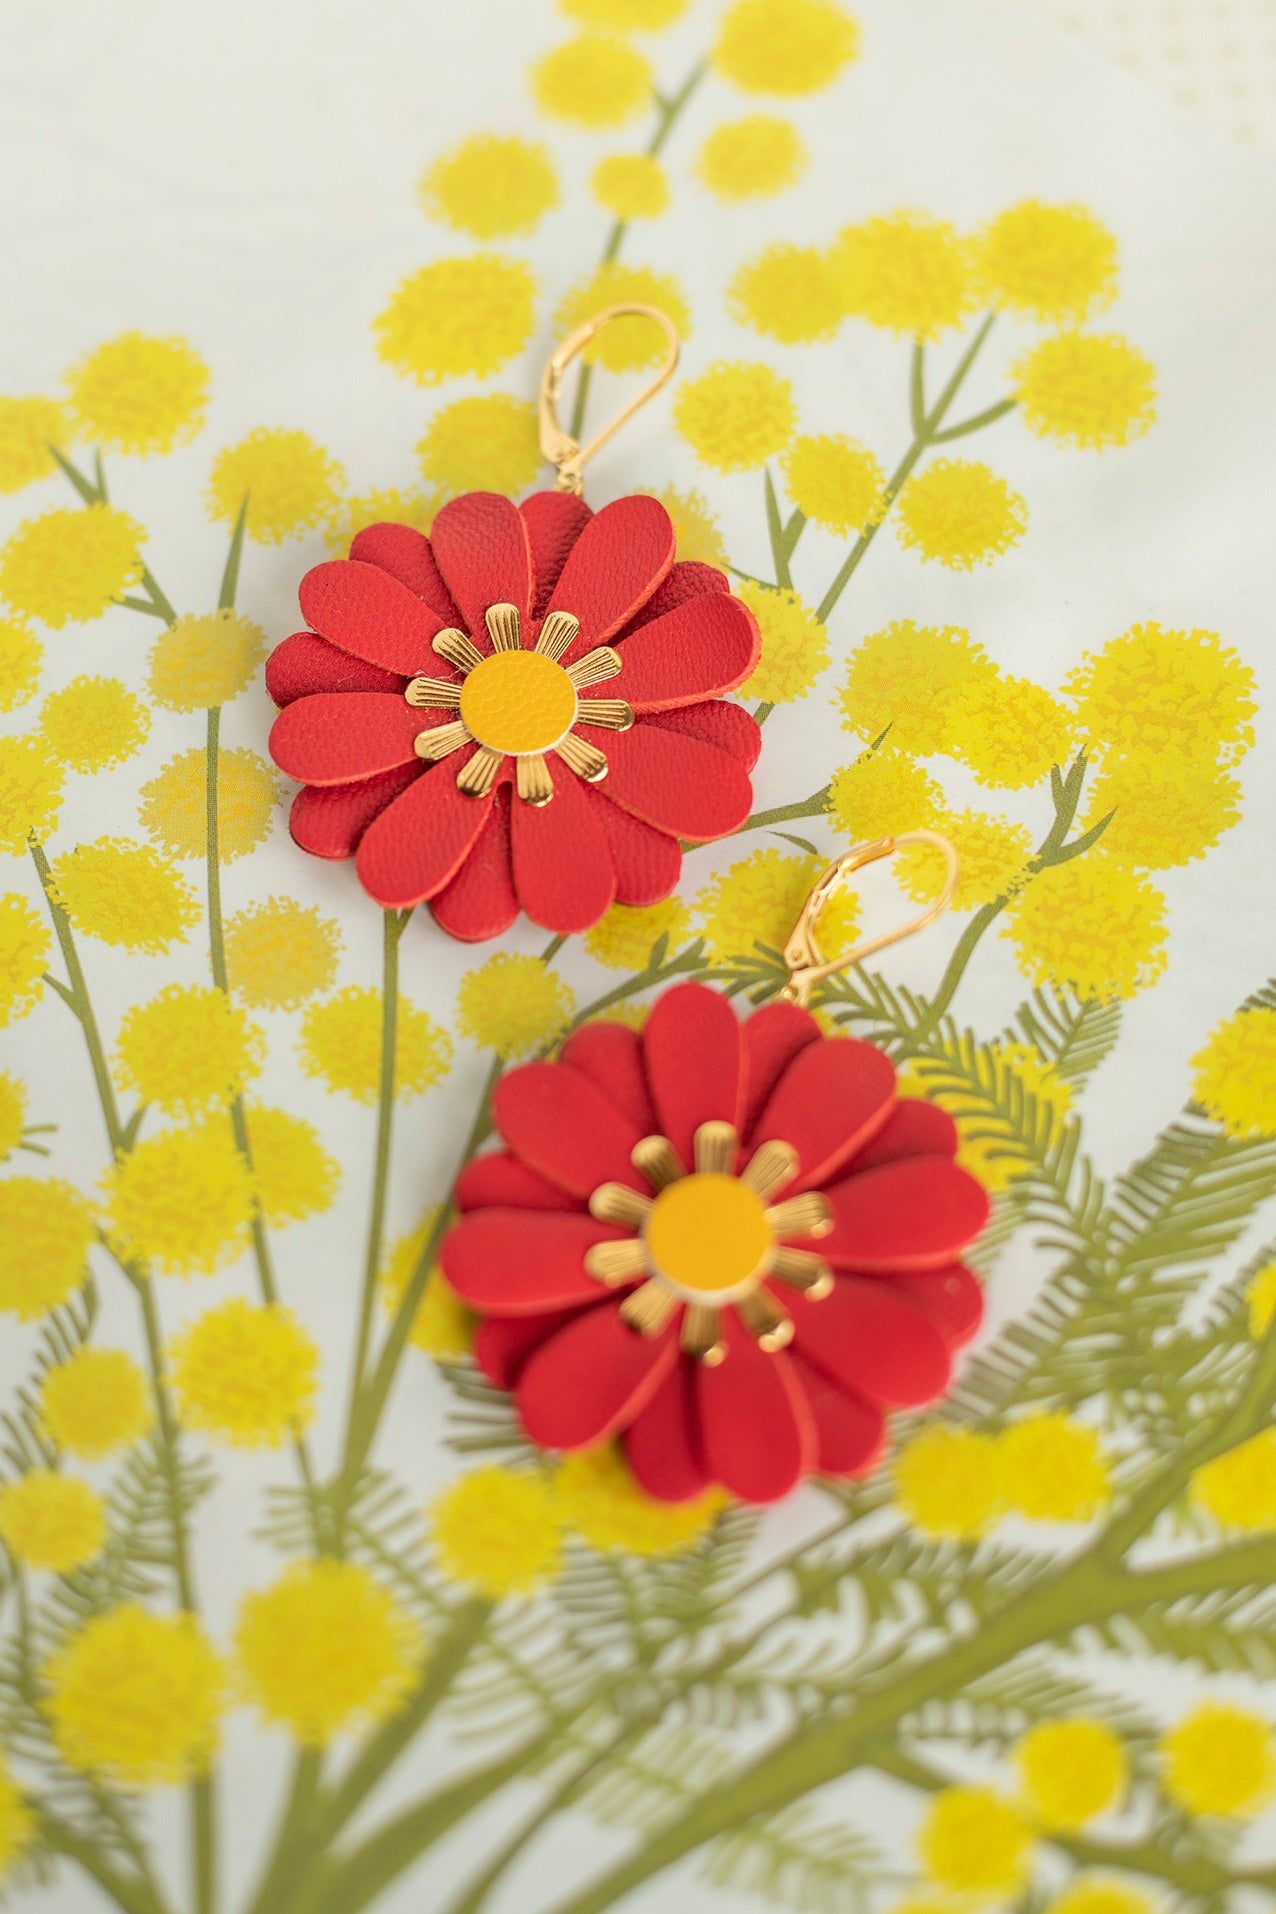 Zinnia flower earrings - bright red and yellow leather